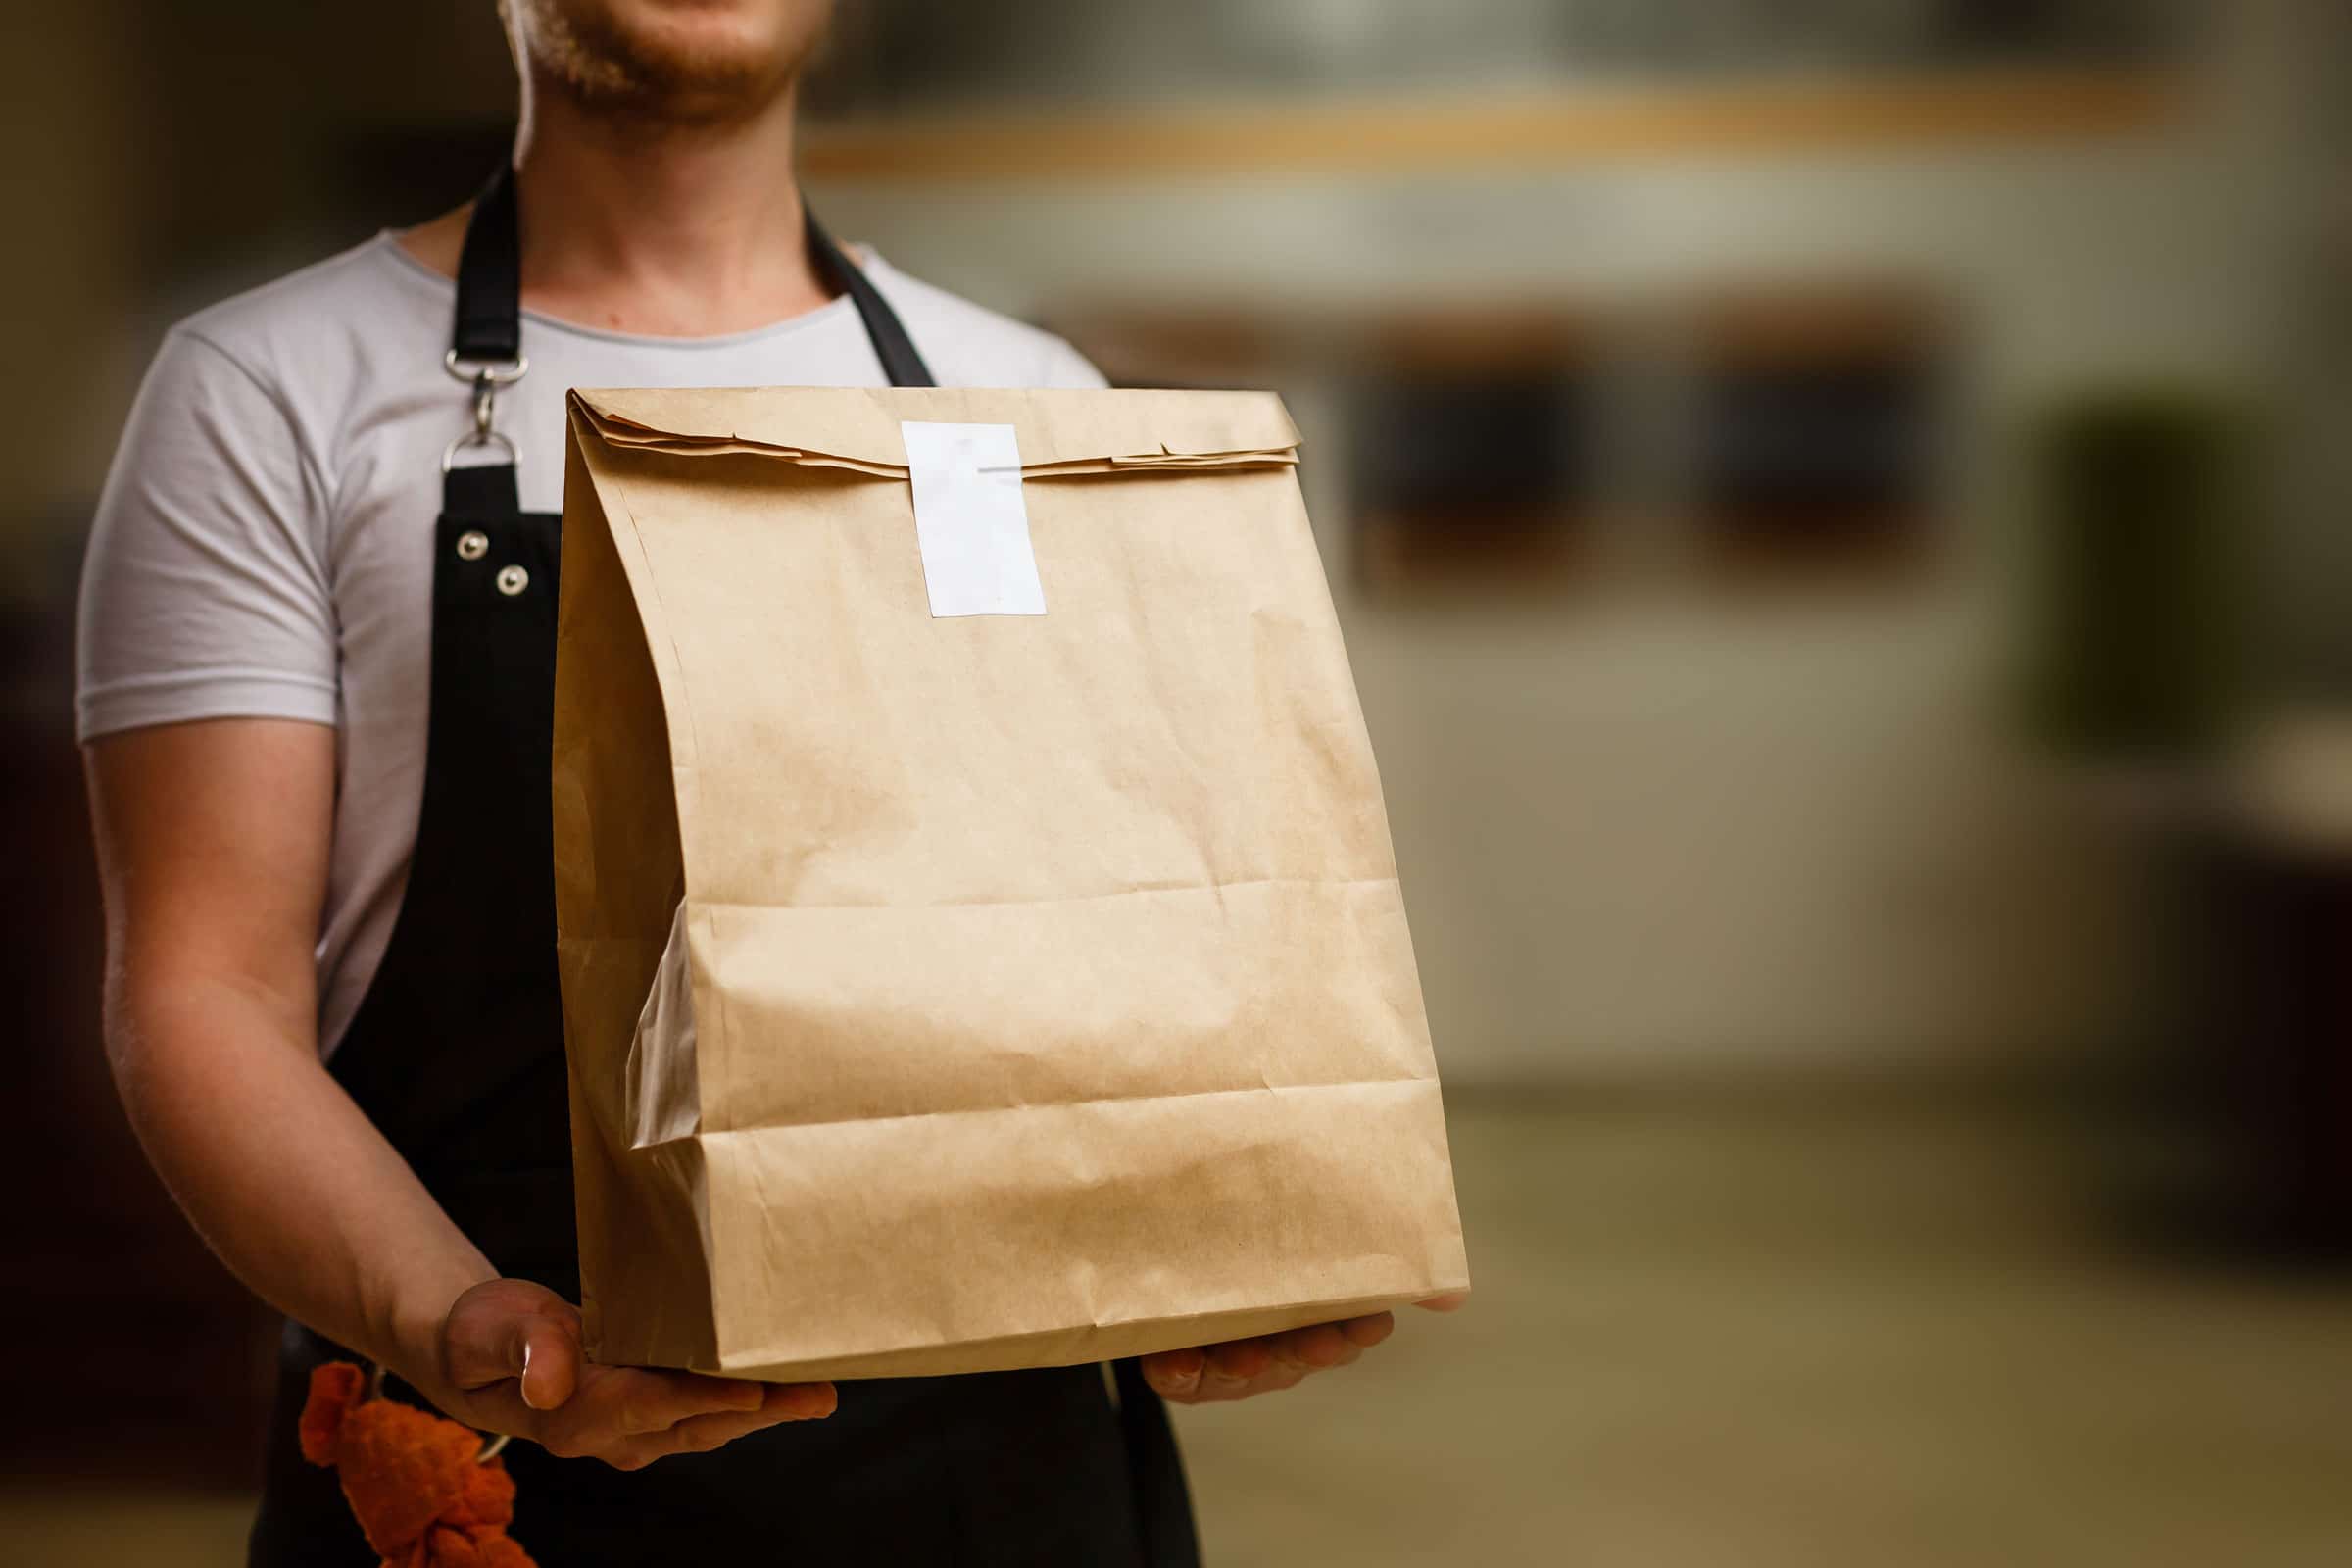 Food Service Sales Growth Employee Delivering Takeout Order